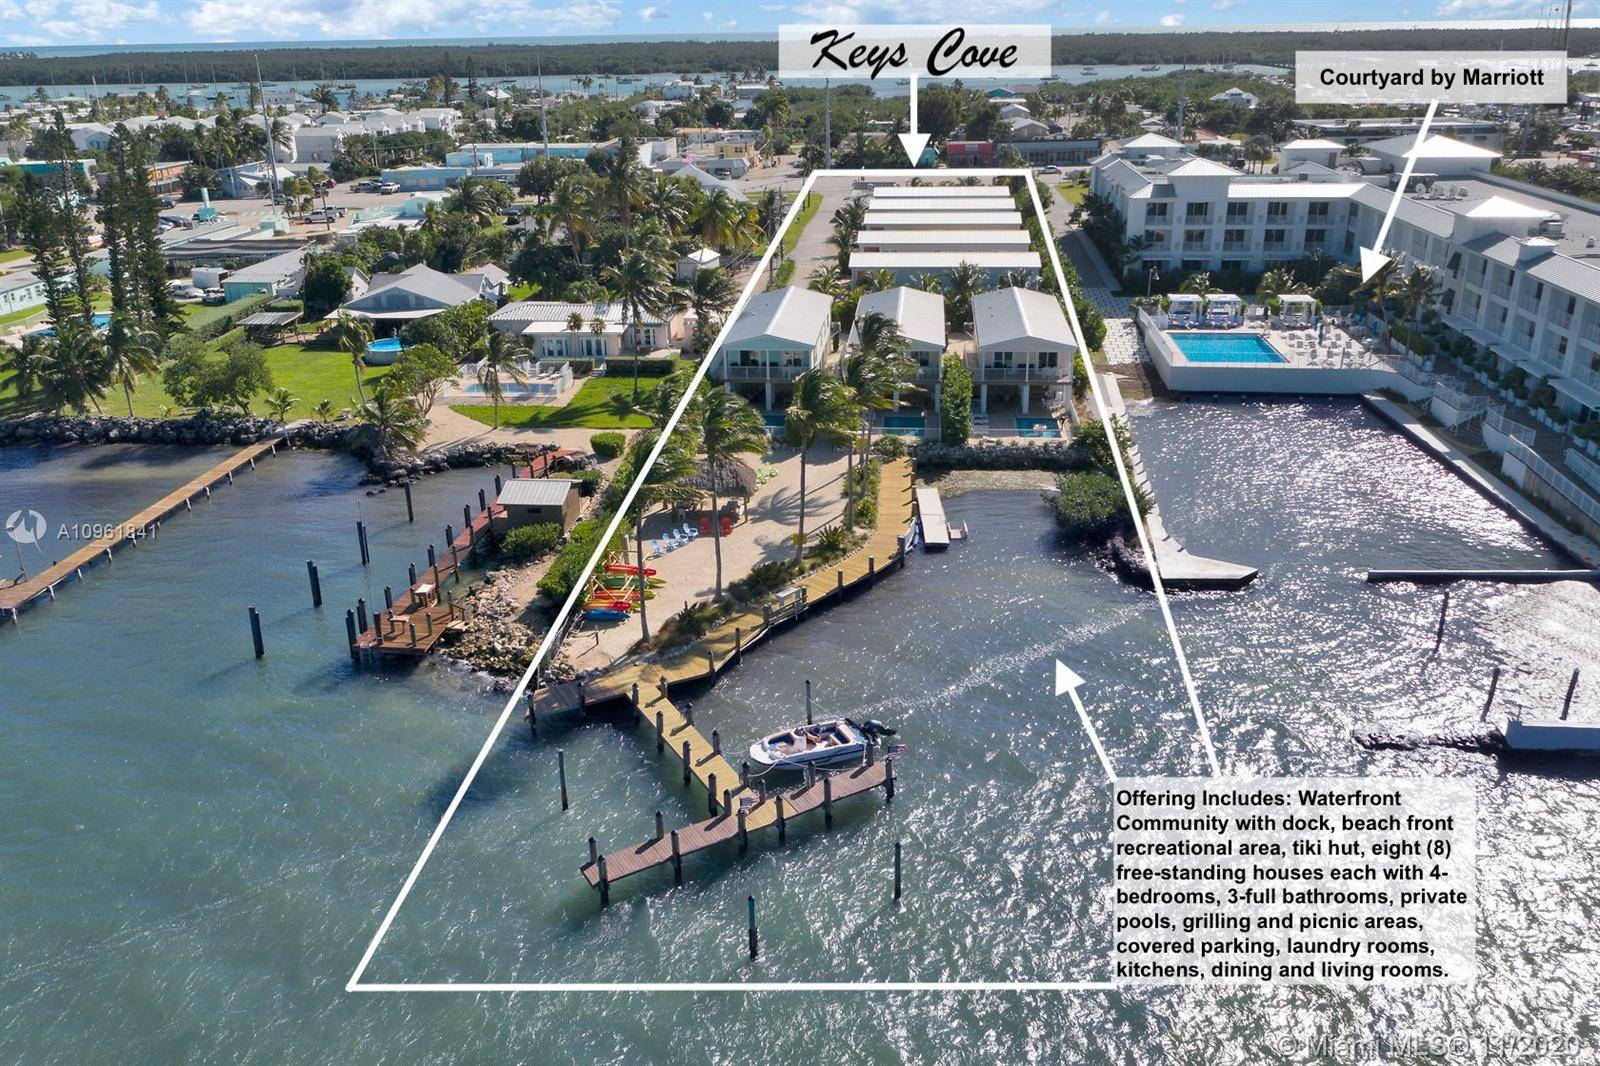 Private turnkey waterfront rental community comprised of eight single family houses, each with four 4 bedrooms and three 3 full bathrooms built to current windstorm standards.